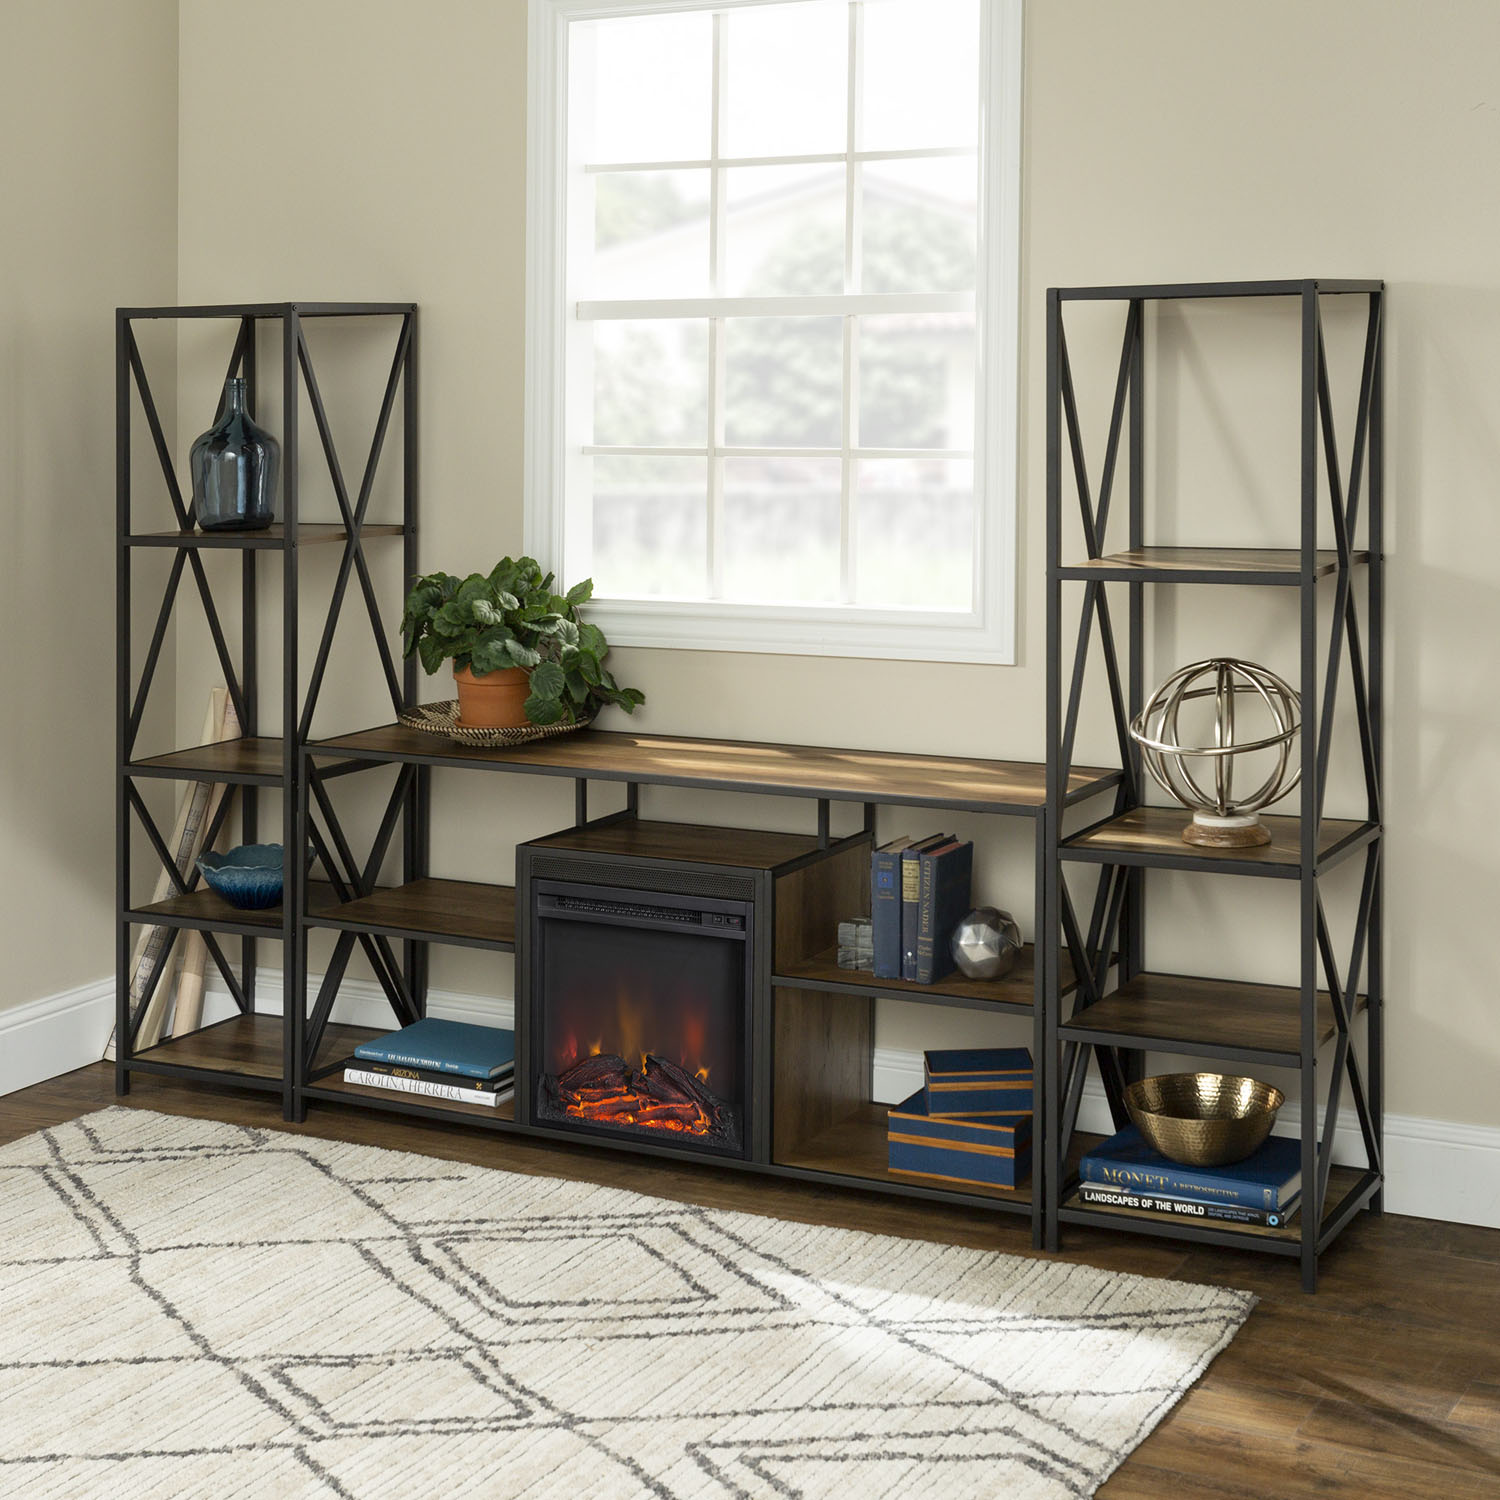 Sauder Tv Stand with Fireplace Beautiful Tv Stands